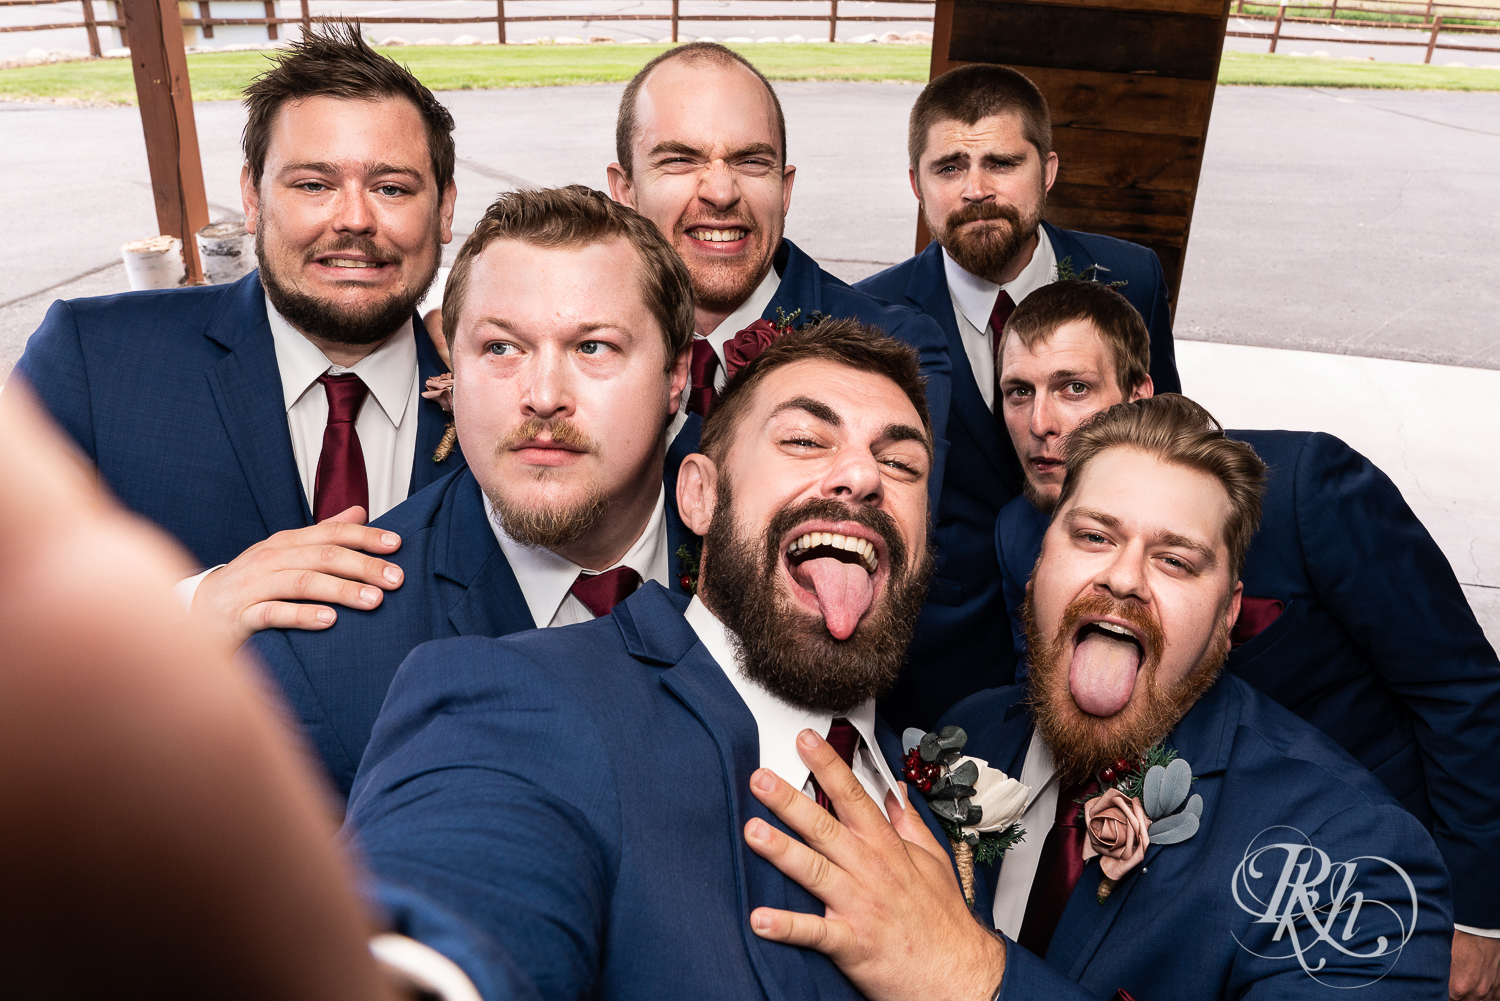 Wedding party in blue suits strike silly poses at Pine Peaks Event Center in Pine River, Minnesota.